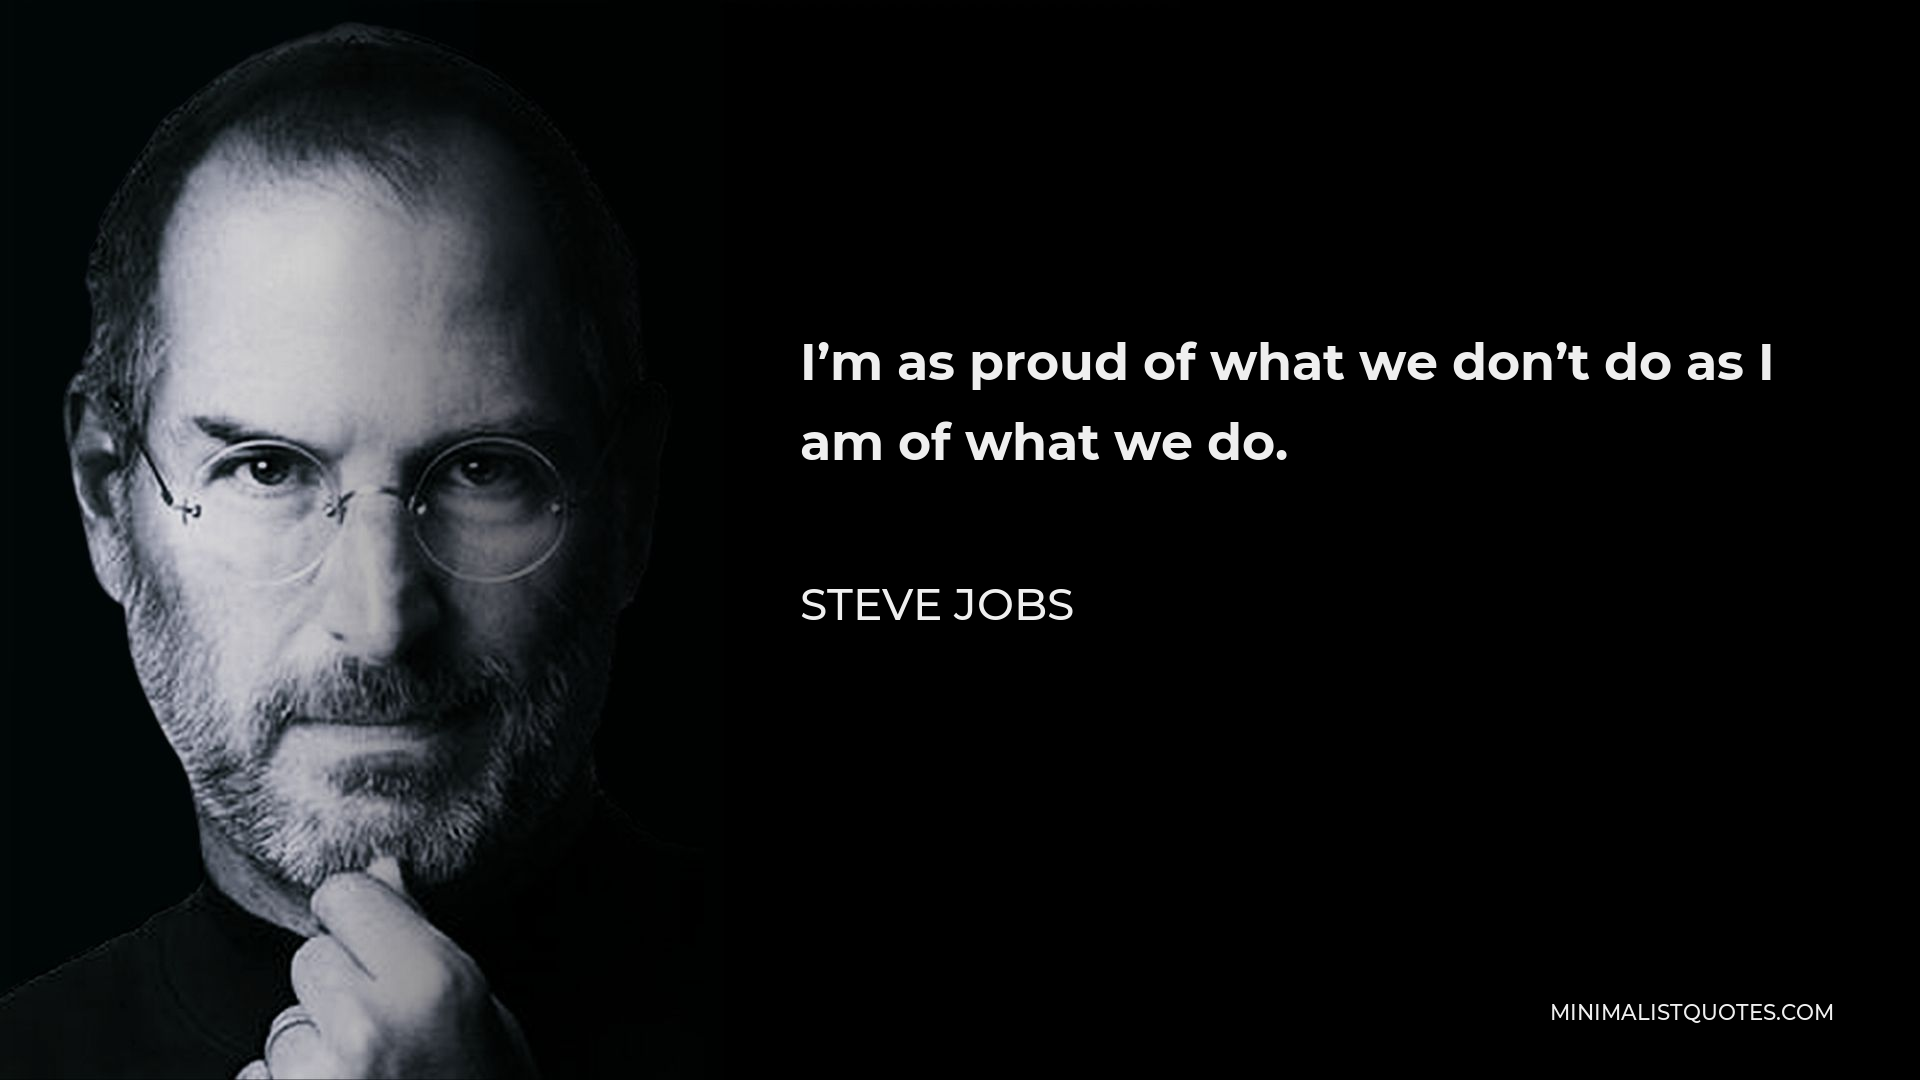 Steve Jobs Quote: I'm as proud of what we don't do as I am of what we do.